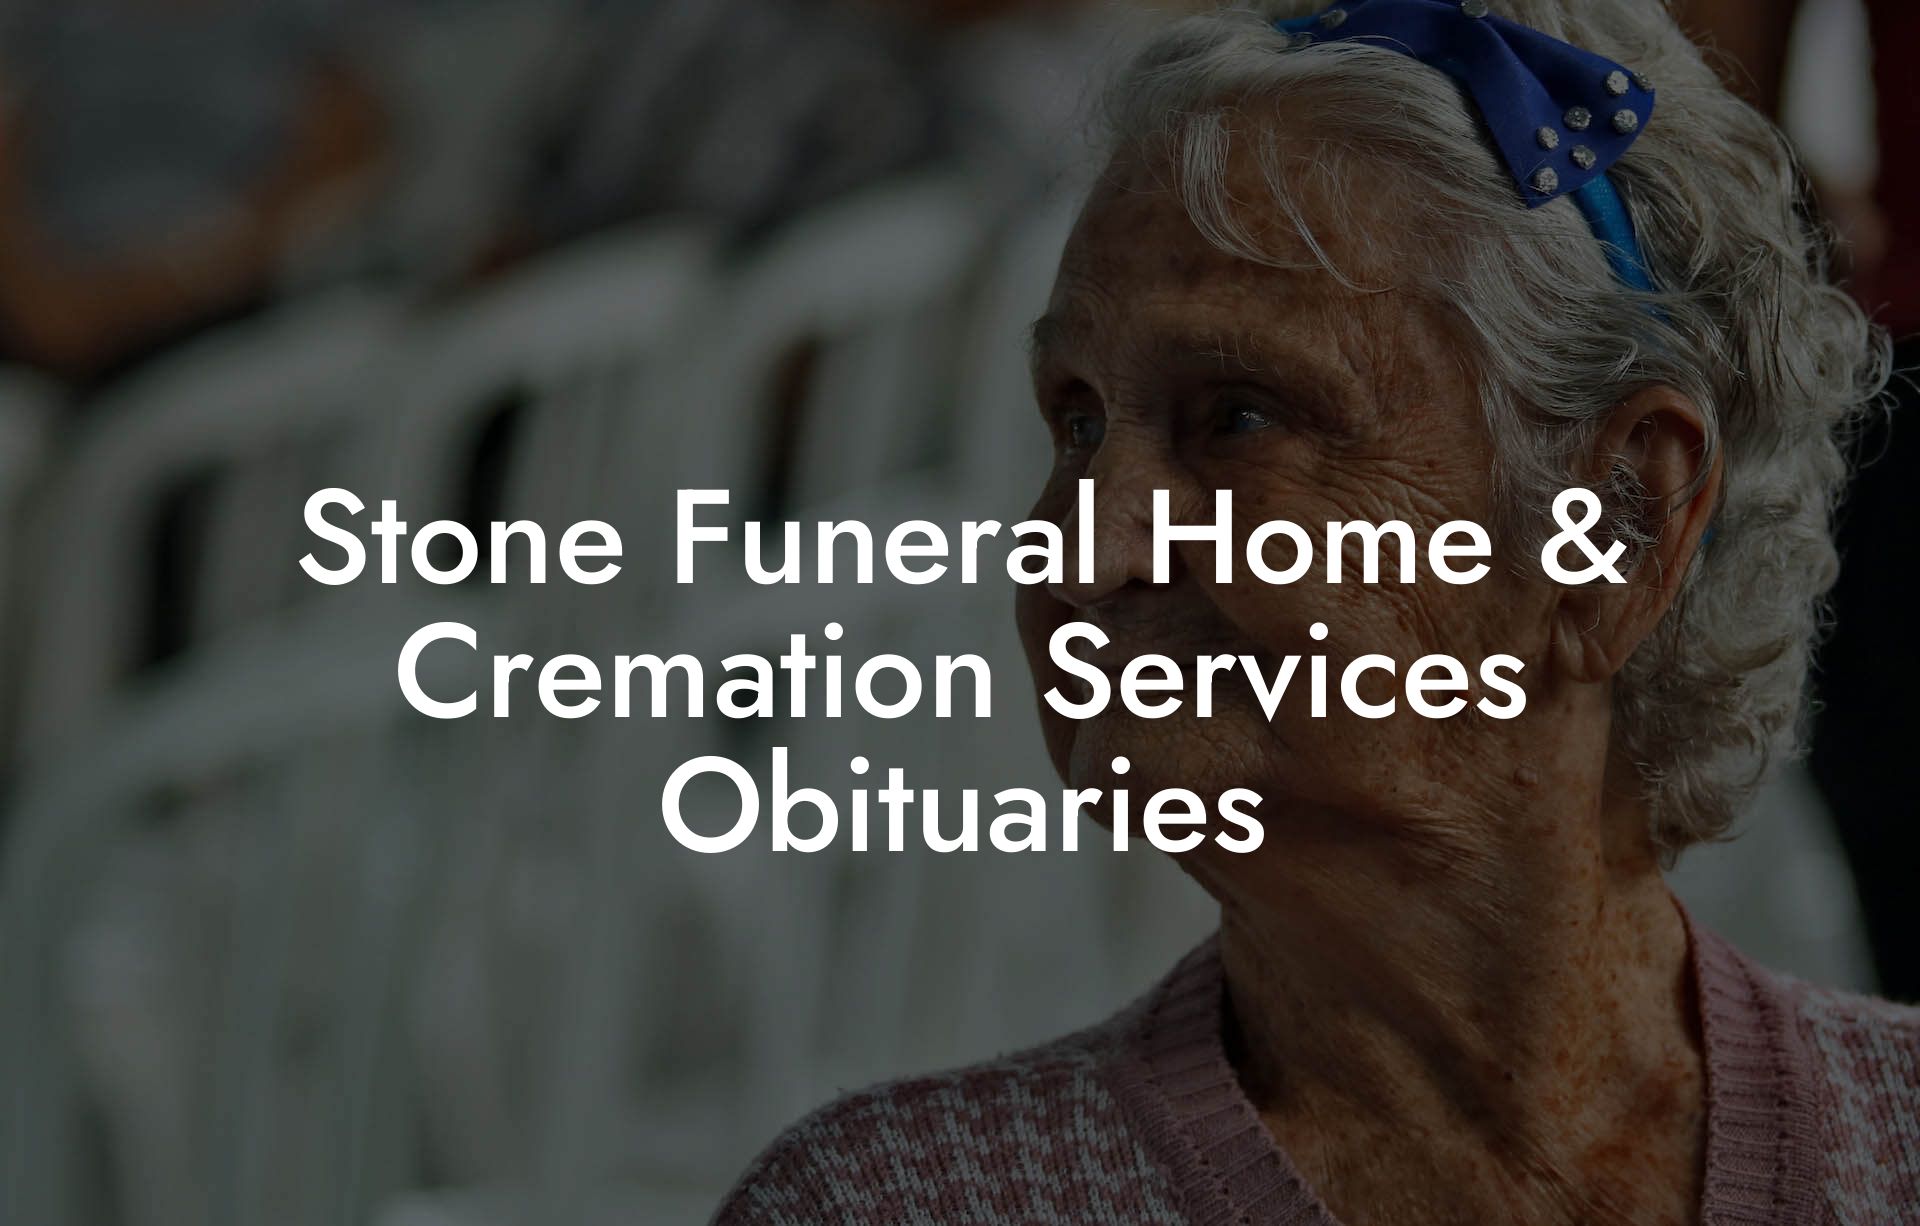 Stone Funeral Home & Cremation Services Obituaries